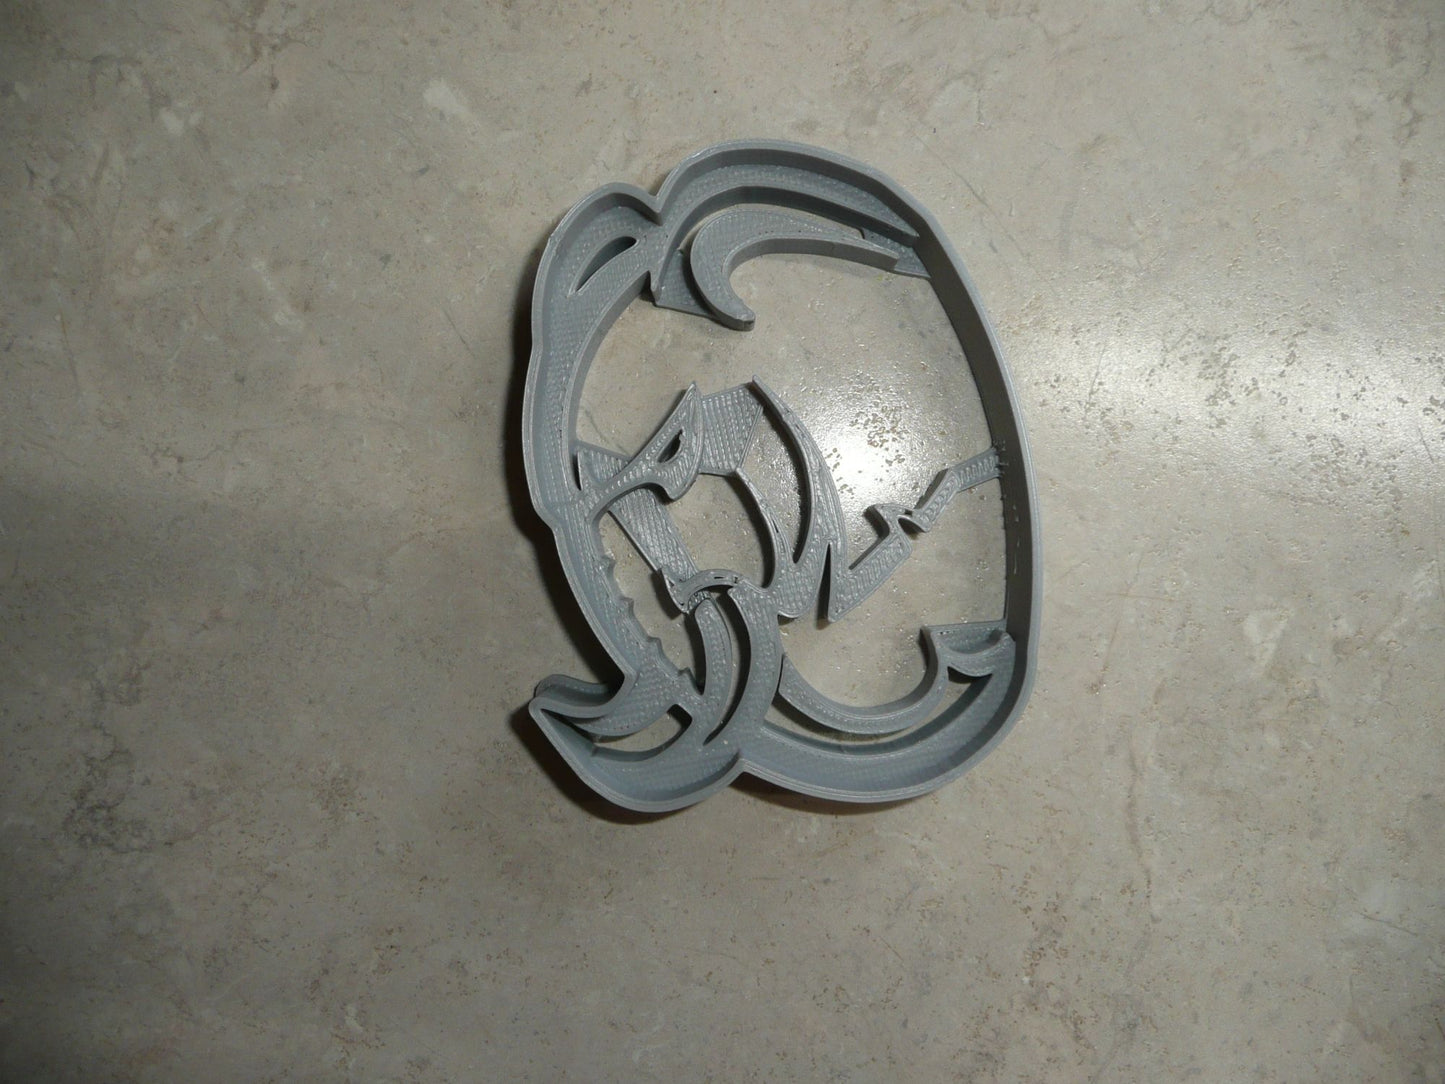 Dodge Challenger Hellephant Muscle Car Cookie Cutter Made in USA PR4466